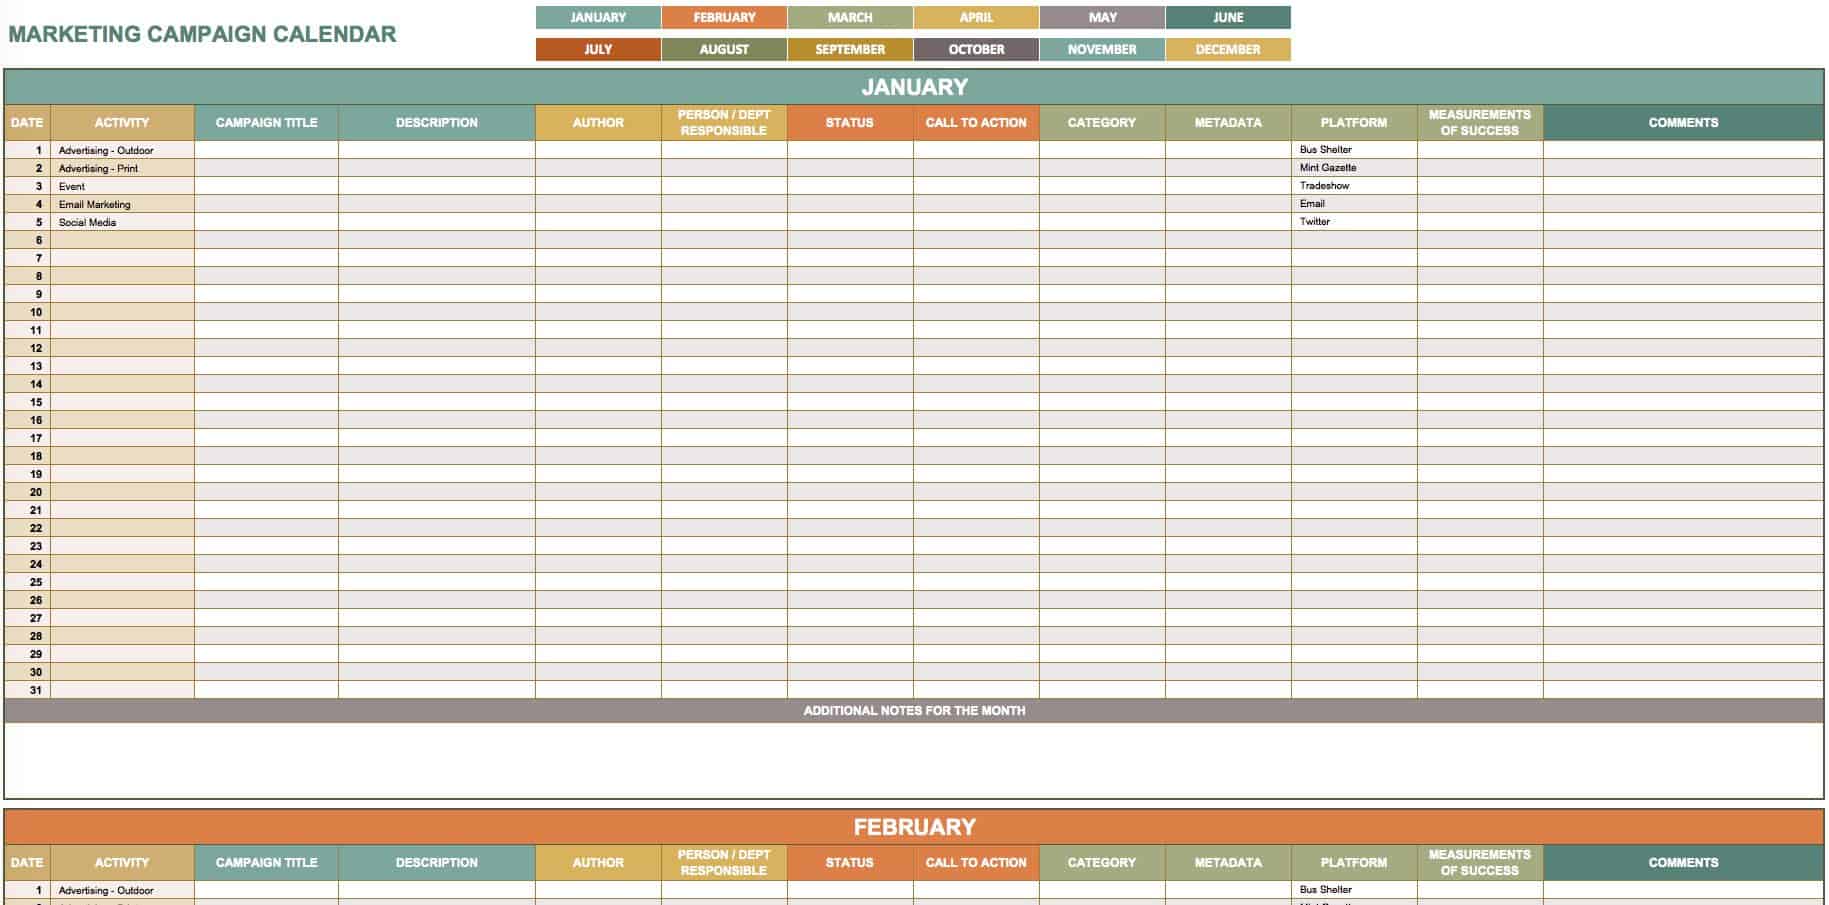 Free Marketing Calendar Templates in Google, Excel, and Word Formats (2023)